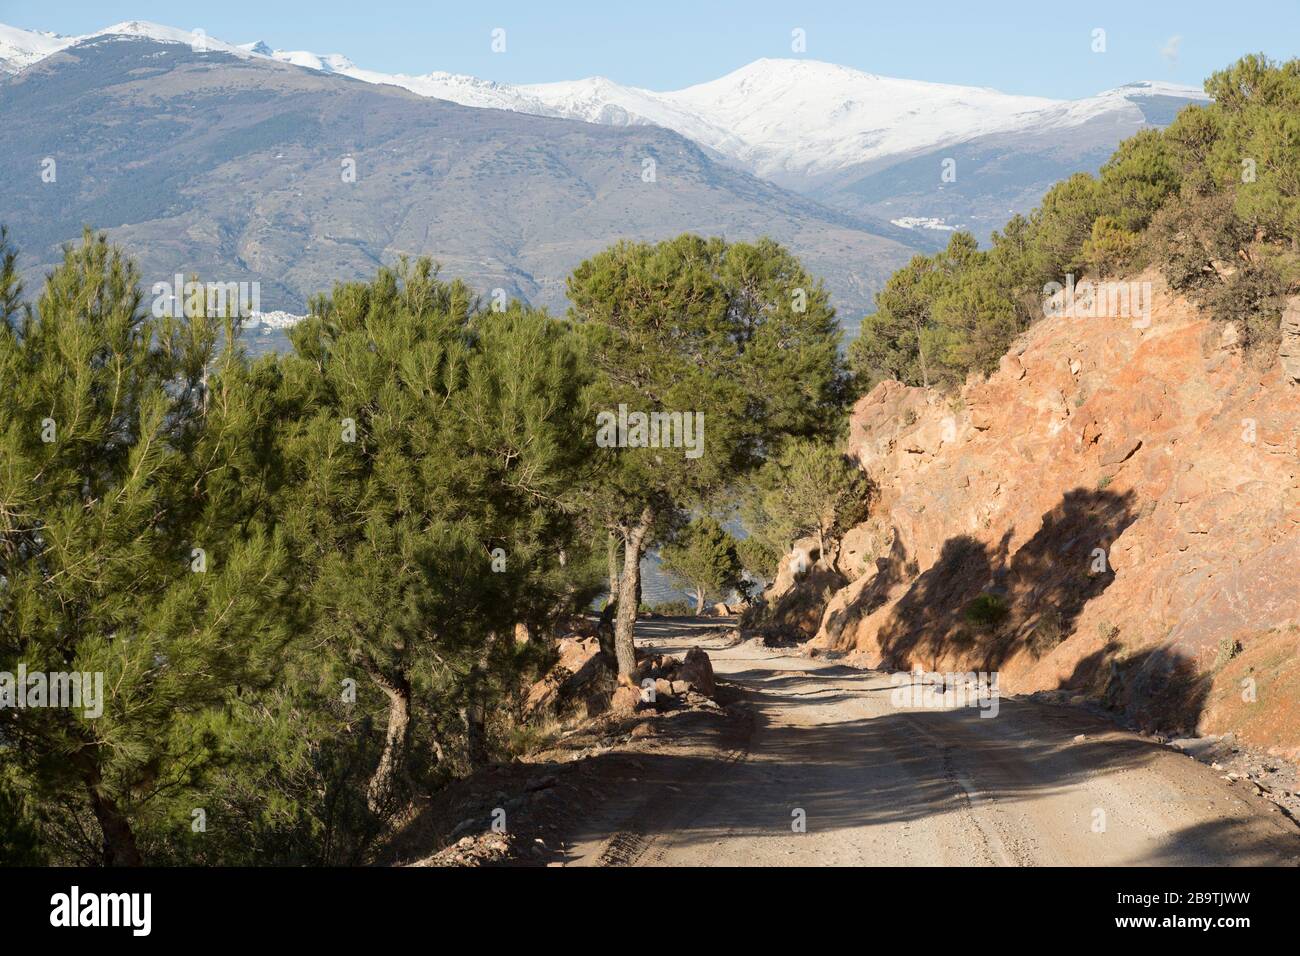 Mountain track and pine trees in the Sierra Lujar with view towards snow capped Mulhacein mountain in Sierra Nevada. Órgiva, Andalusia, Spain Stock Photo